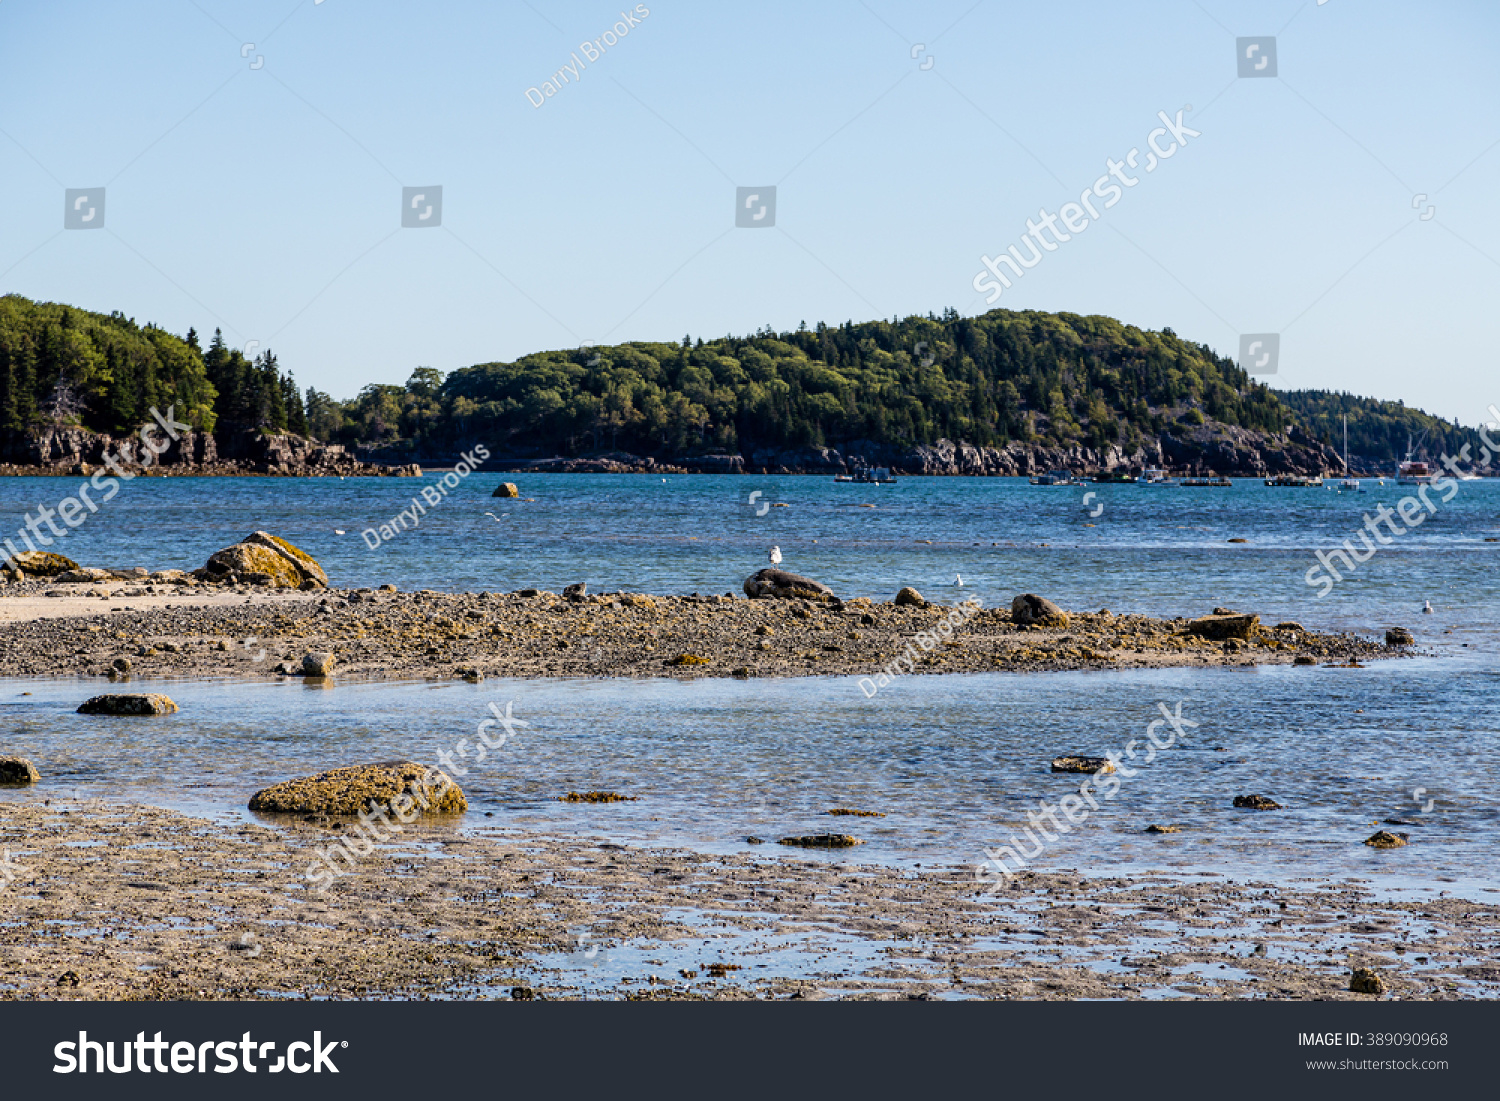 Low Tide With Tidal Pools Near Bar Harbor Maine Stock Photo 389090968 : Shutterstock